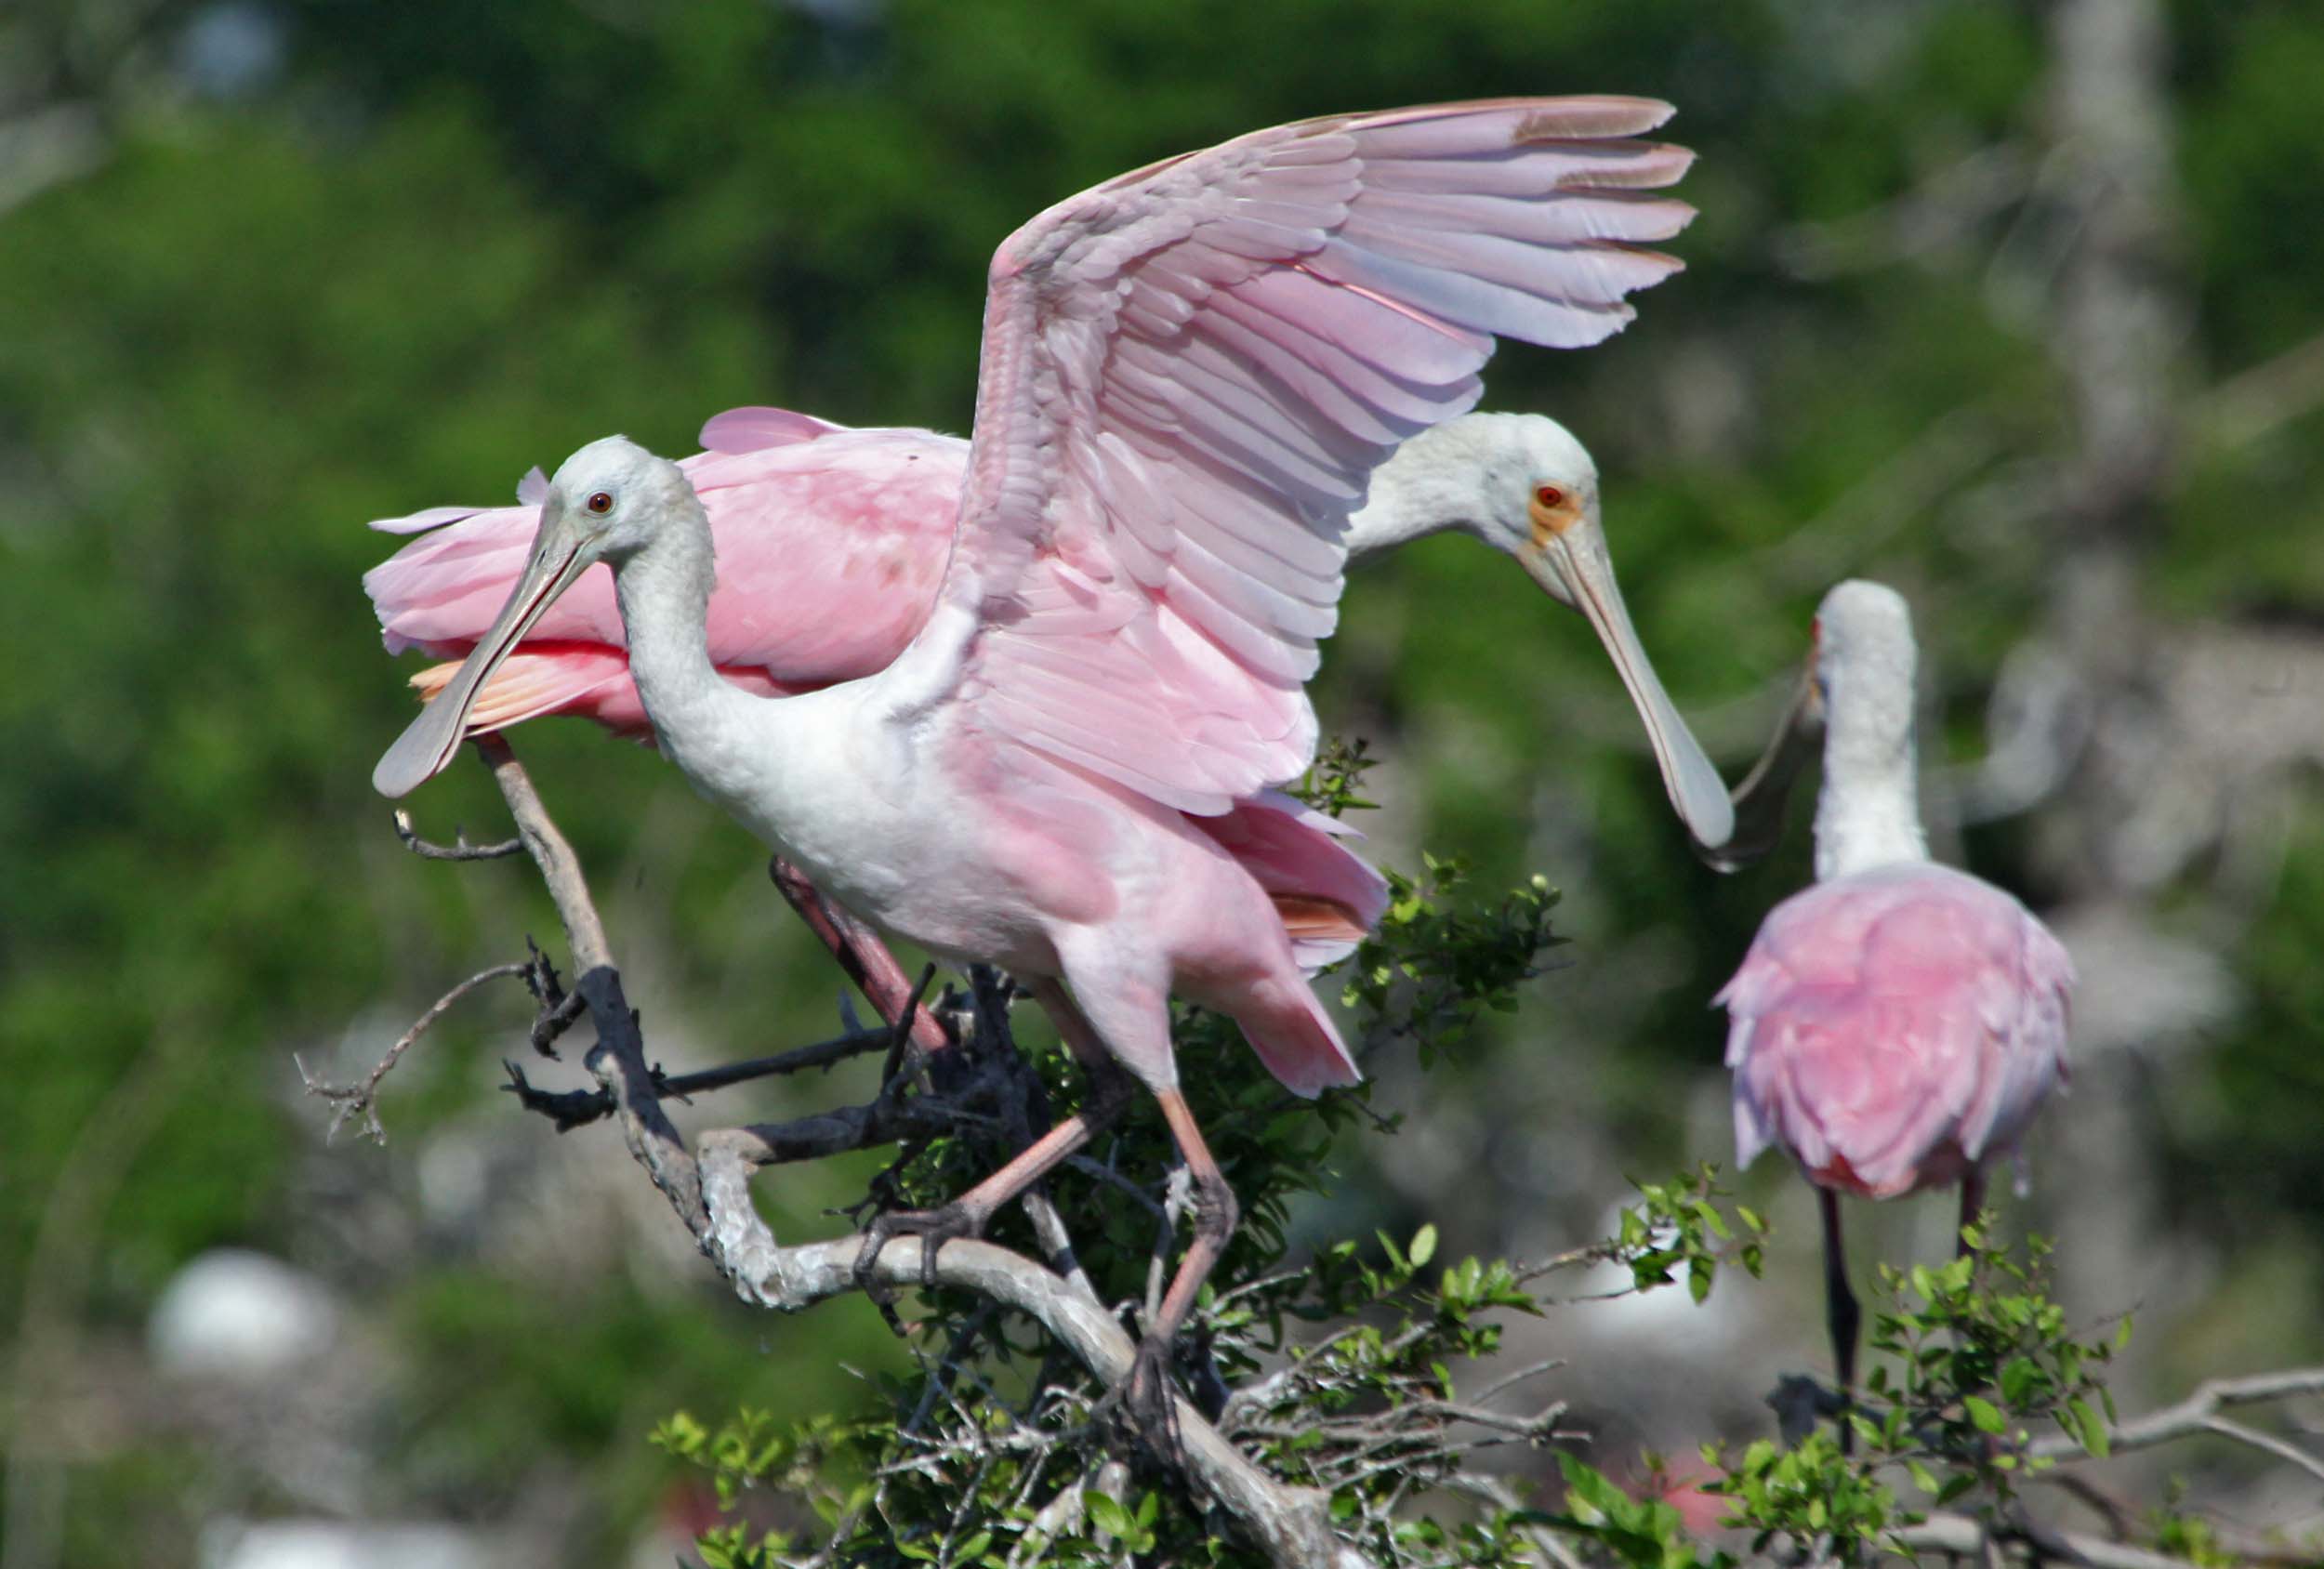 Texas 8 by 8 Texas 8 by 8 3dRose phl_260185_1 Pot Holder Roseate spoonbills bickering in the nest High Island